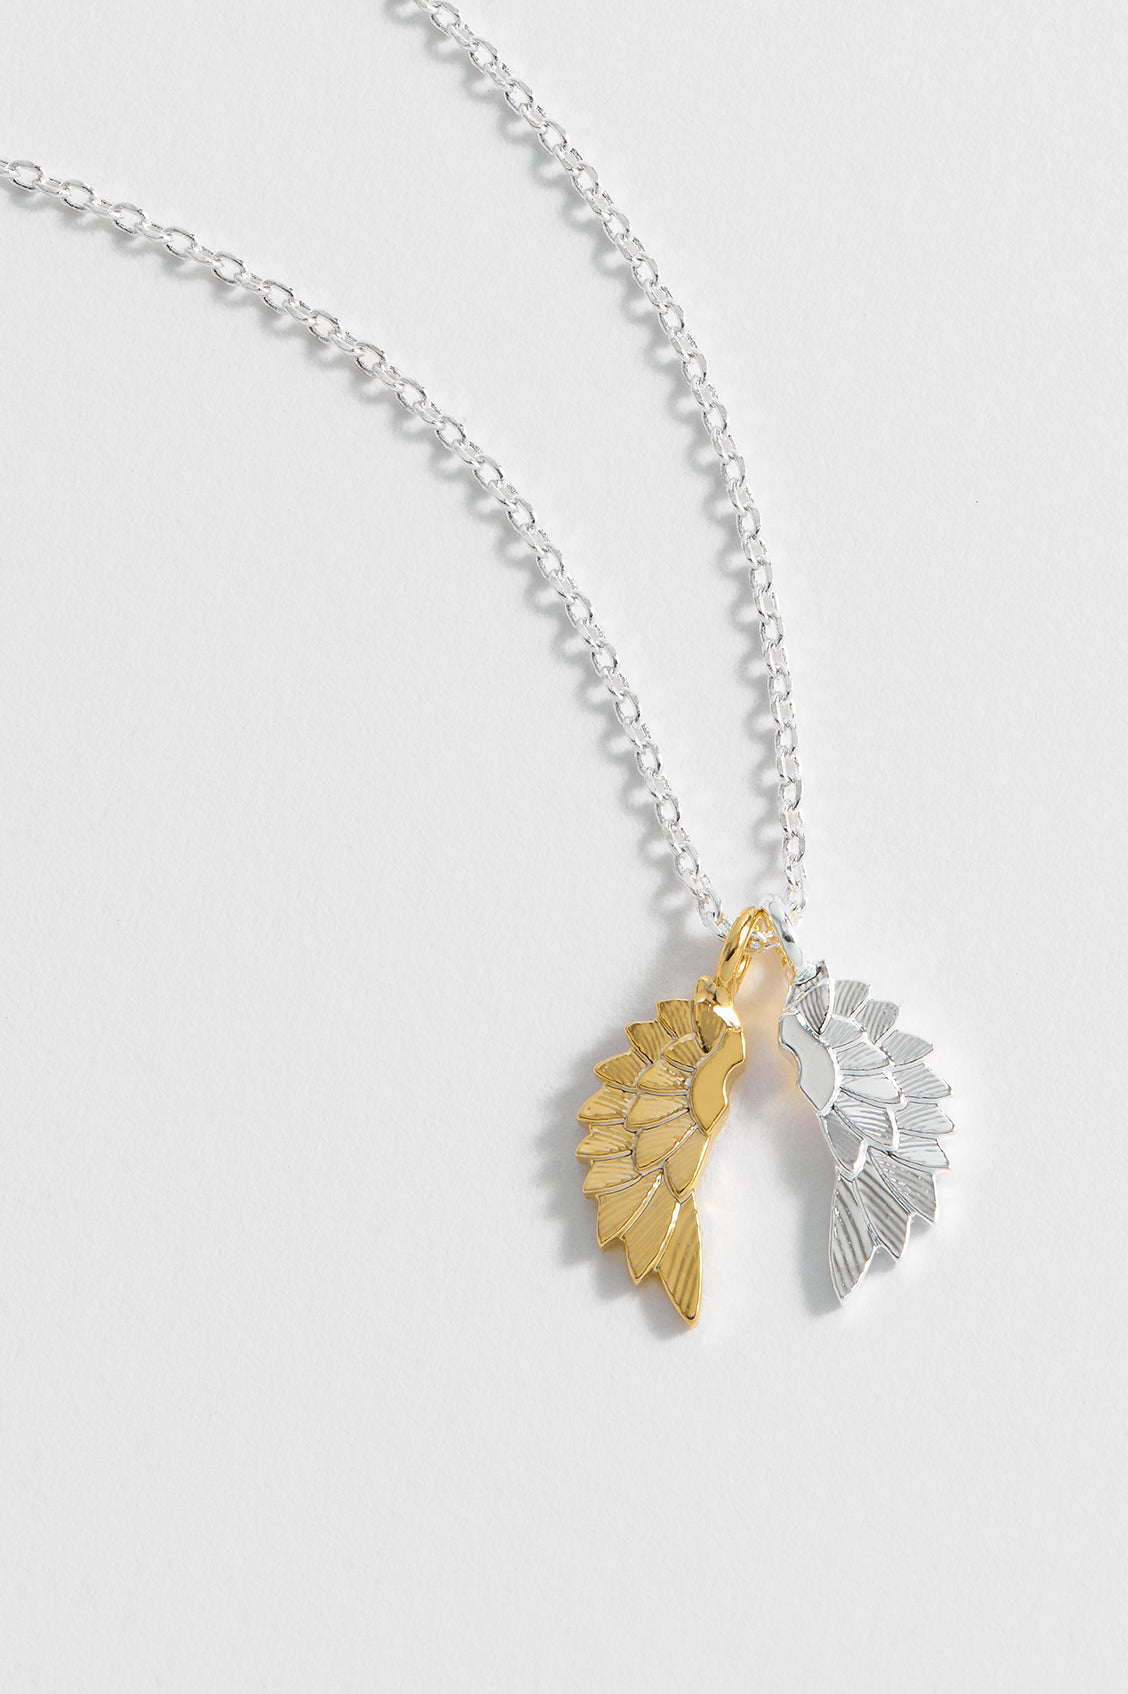 Estella Bartlett Wing Necklace - Silver & Gold Plated